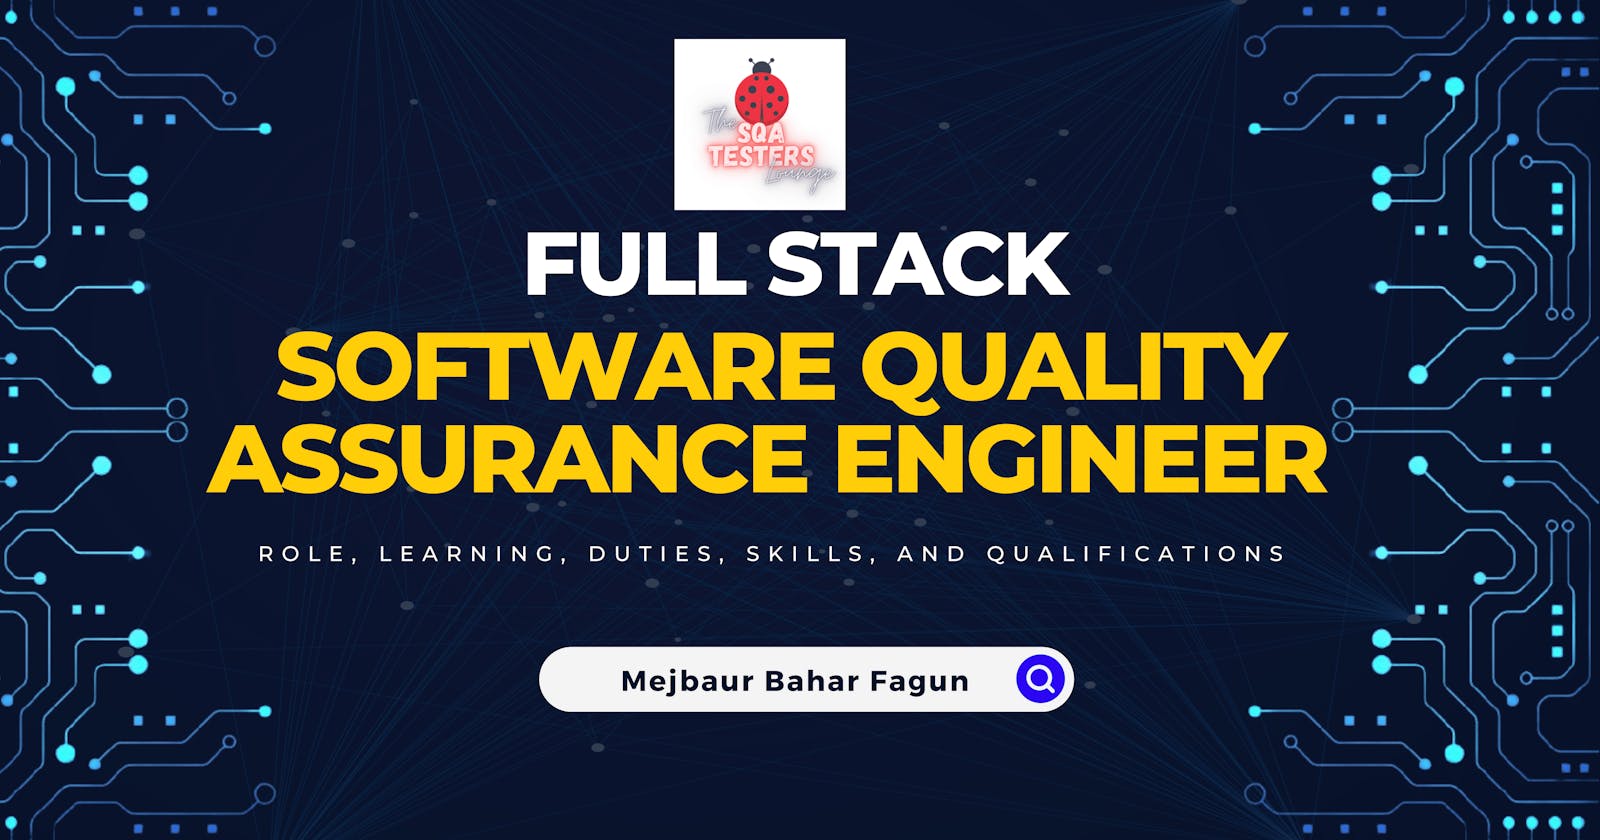 Full Stack Software Quality Assurance Engineer - Role, Learning, Duties, Skills, and Qualifications